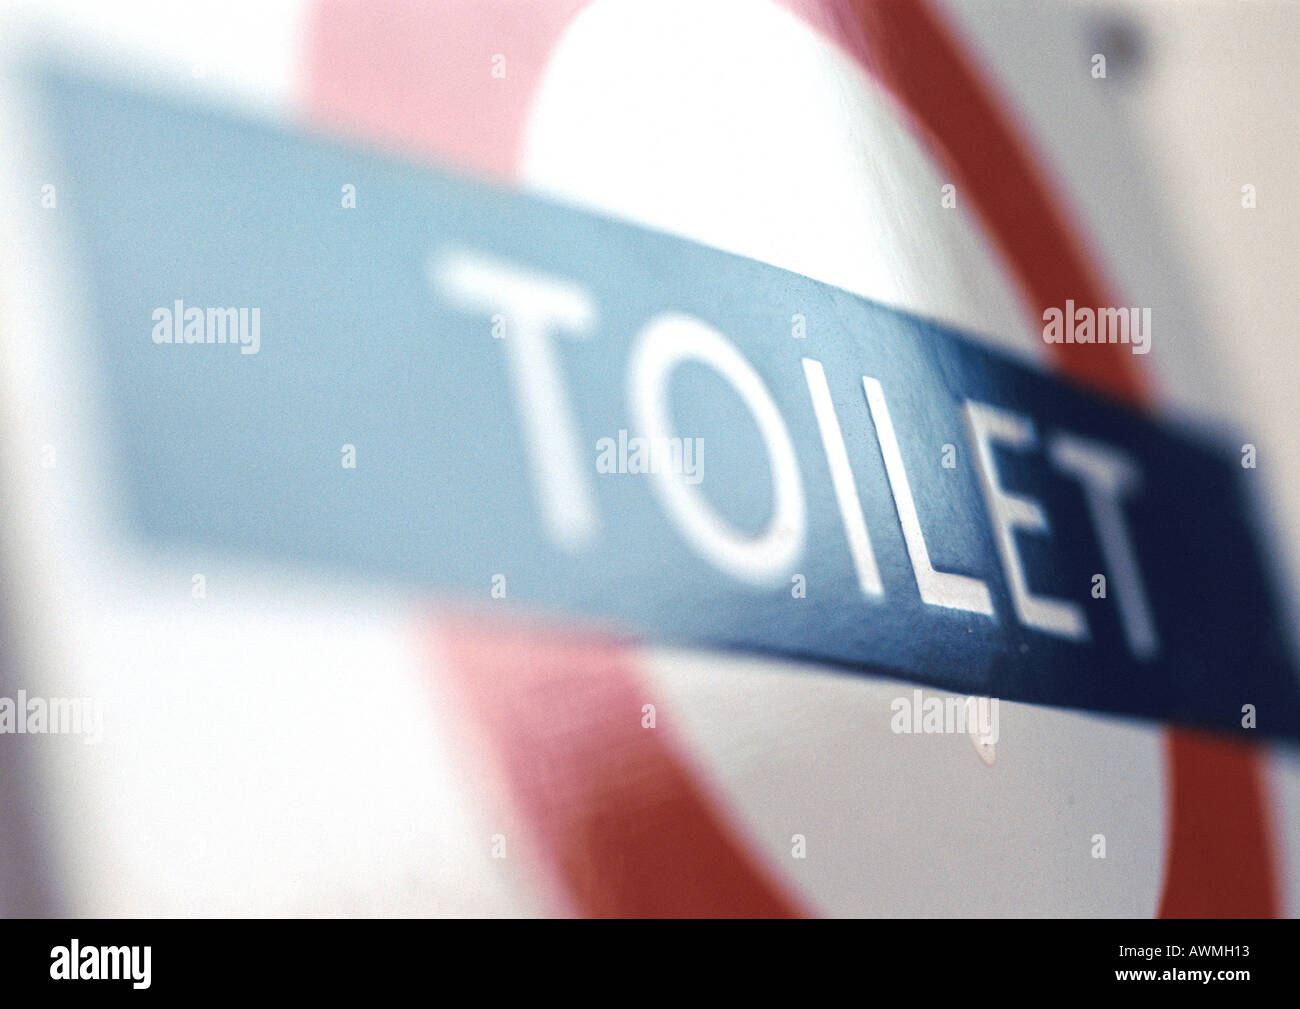 Toilet text on sign, close-up, blurred Stock Photo